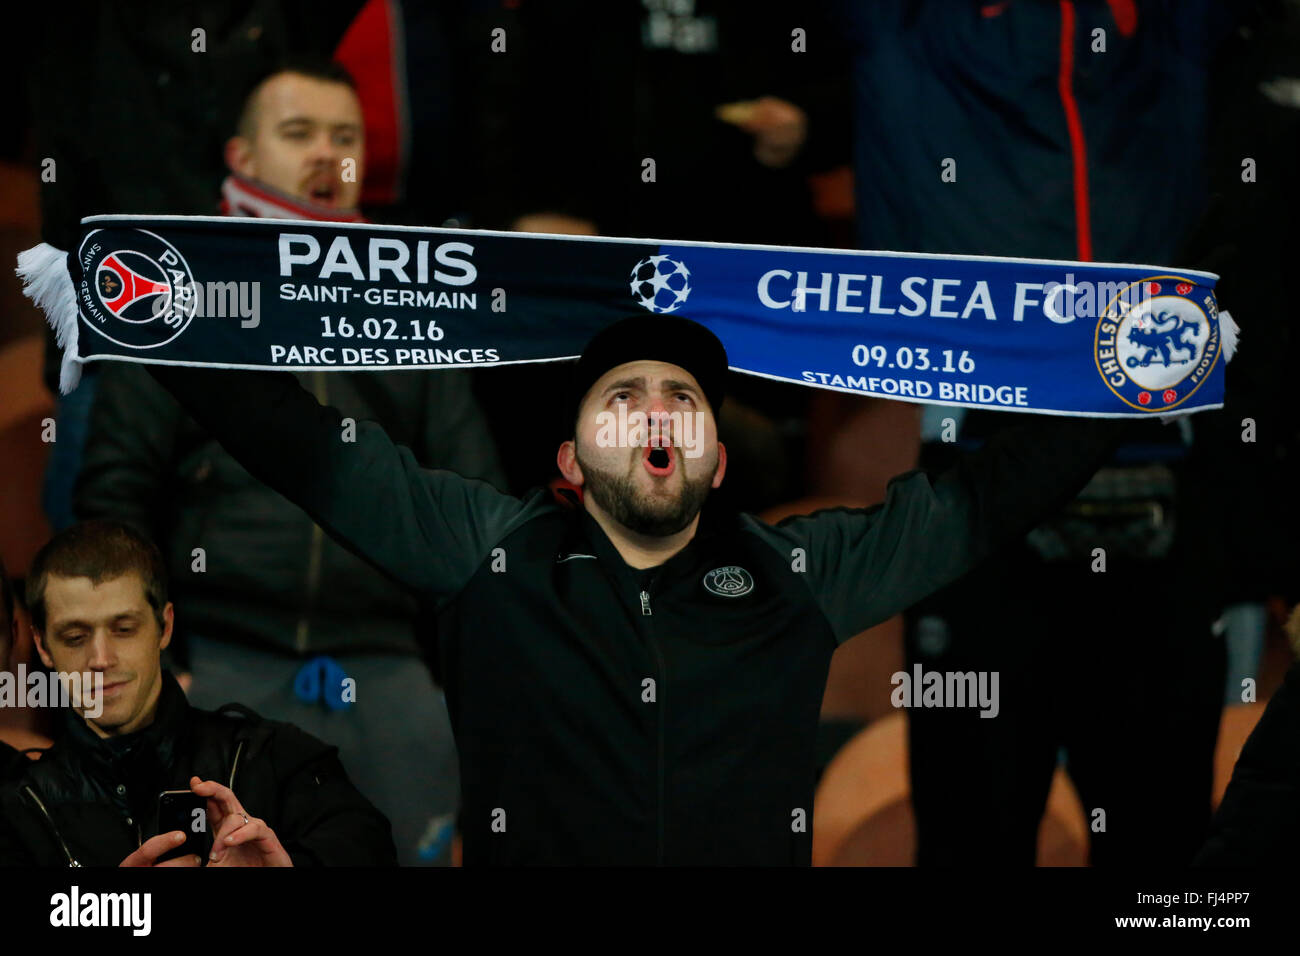 PSG fans singing during the UEFA Champions League round of 16 match between Paris Saint-Germain and Chelsea at the Parc des Princes Stadium in Paris. February 16, 2016. James Boardman / Telephoto Images +44 7967 642437 Stock Photo